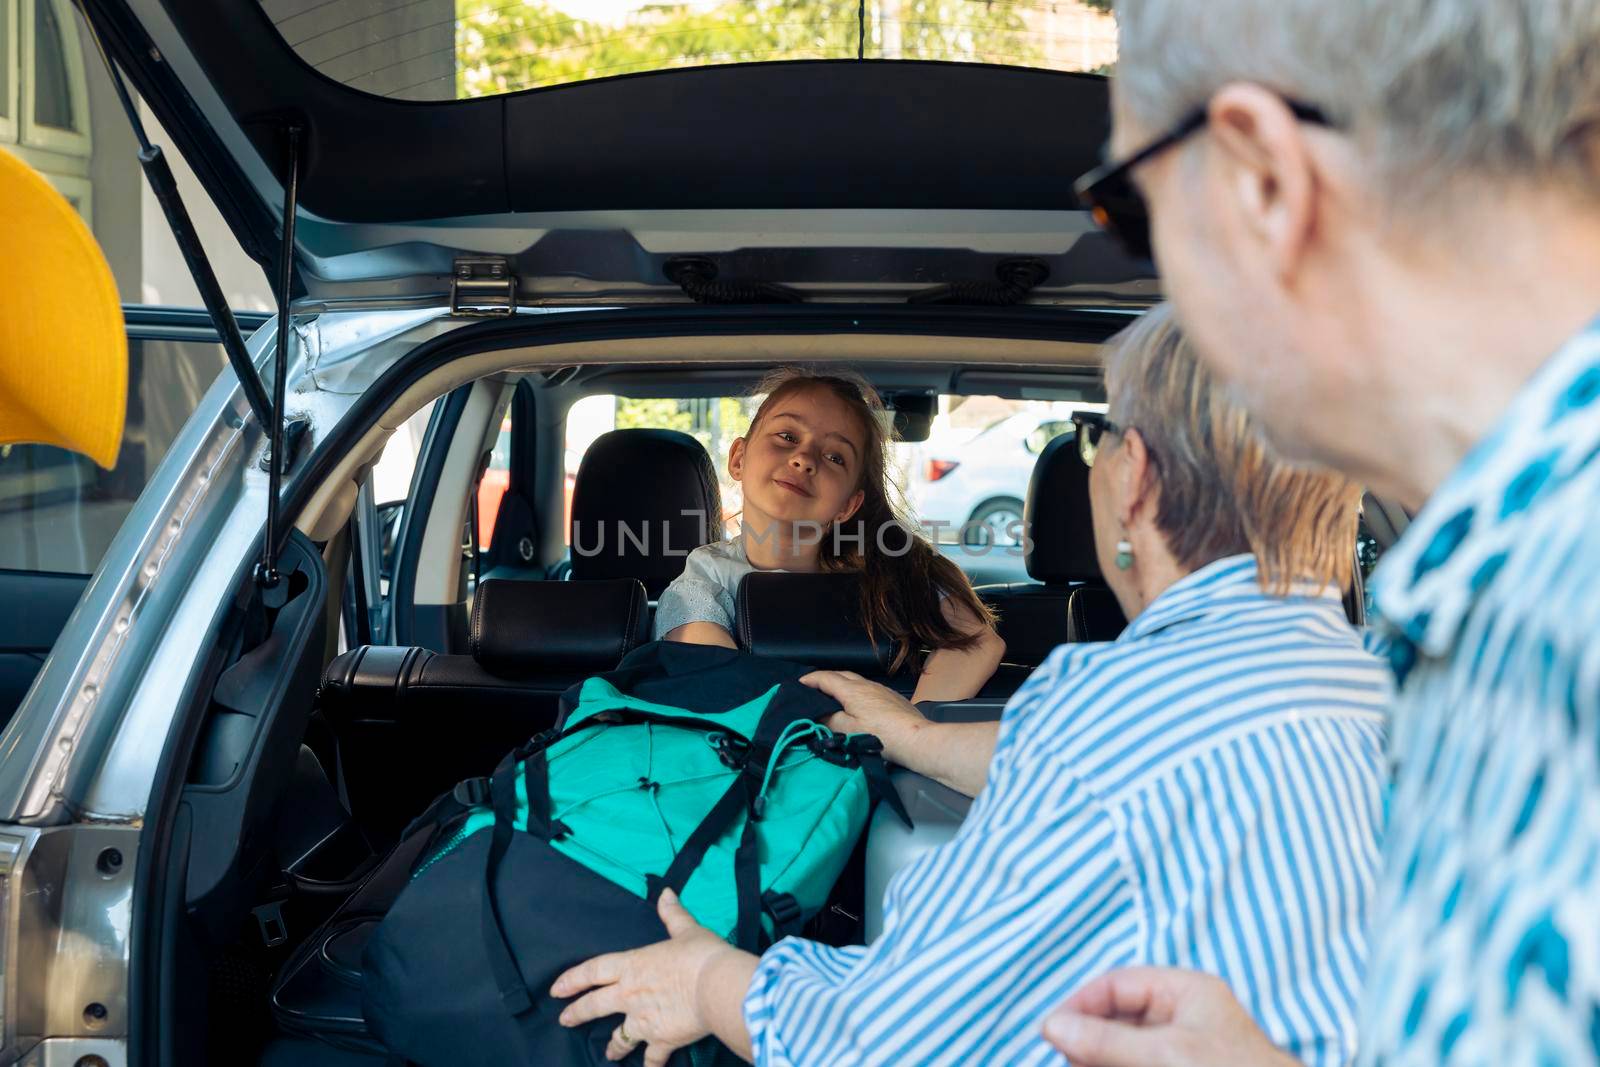 Little girl going on vacation with family, preparing to leave on summer holiday at seaside with parents and grandparents. Putting luggage in vehicle trunk to travel to journey destination.